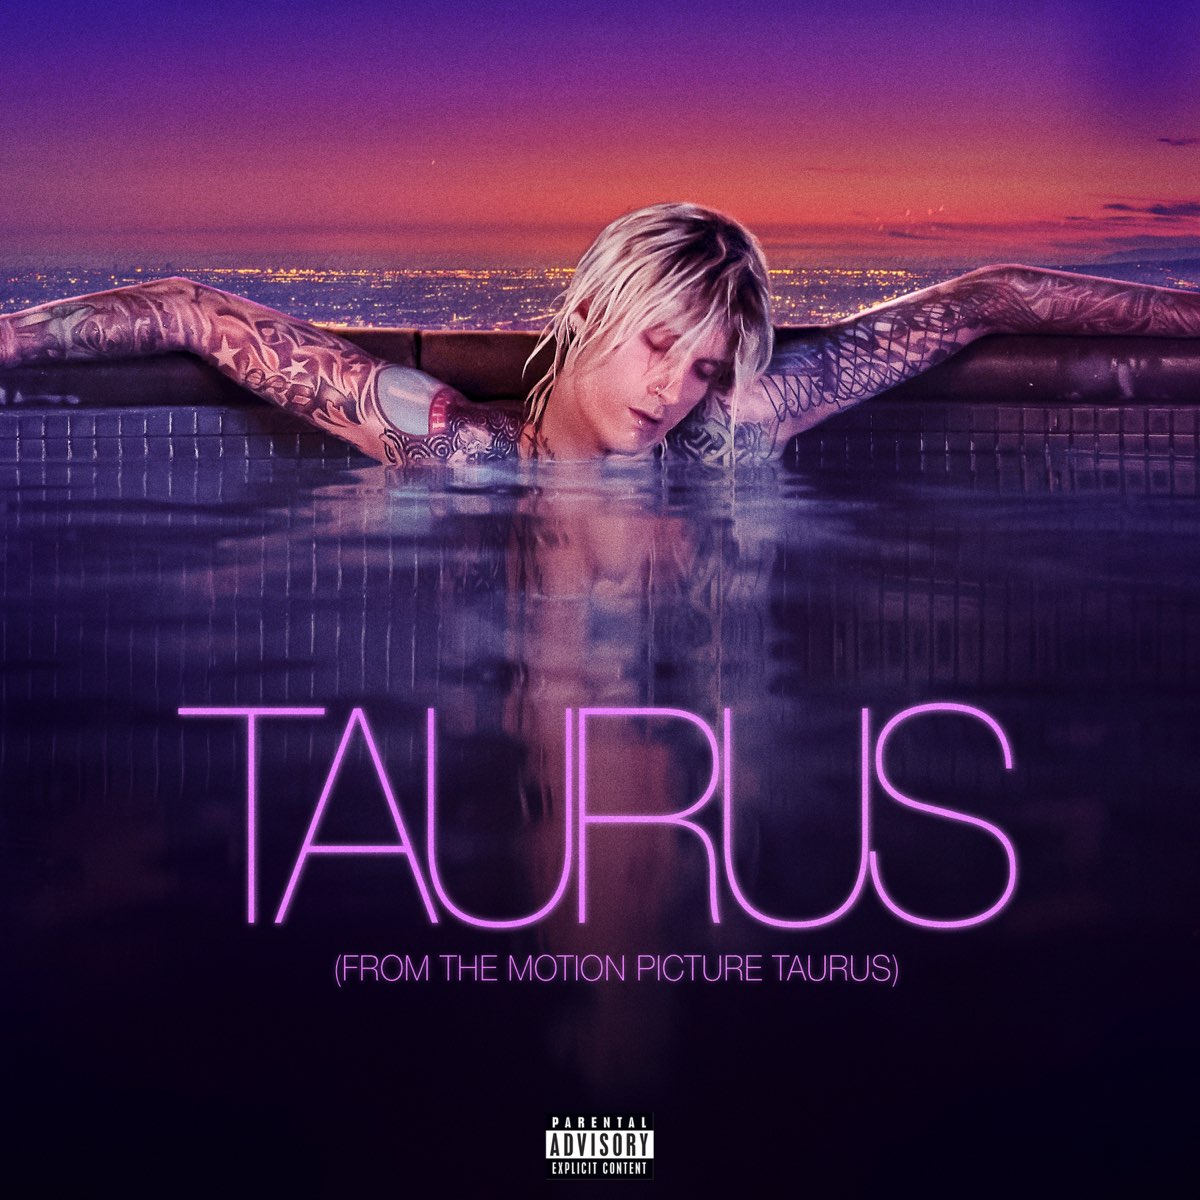 taurus-from-the-motion-picture-taurus-feat-naomi-wild-single-by